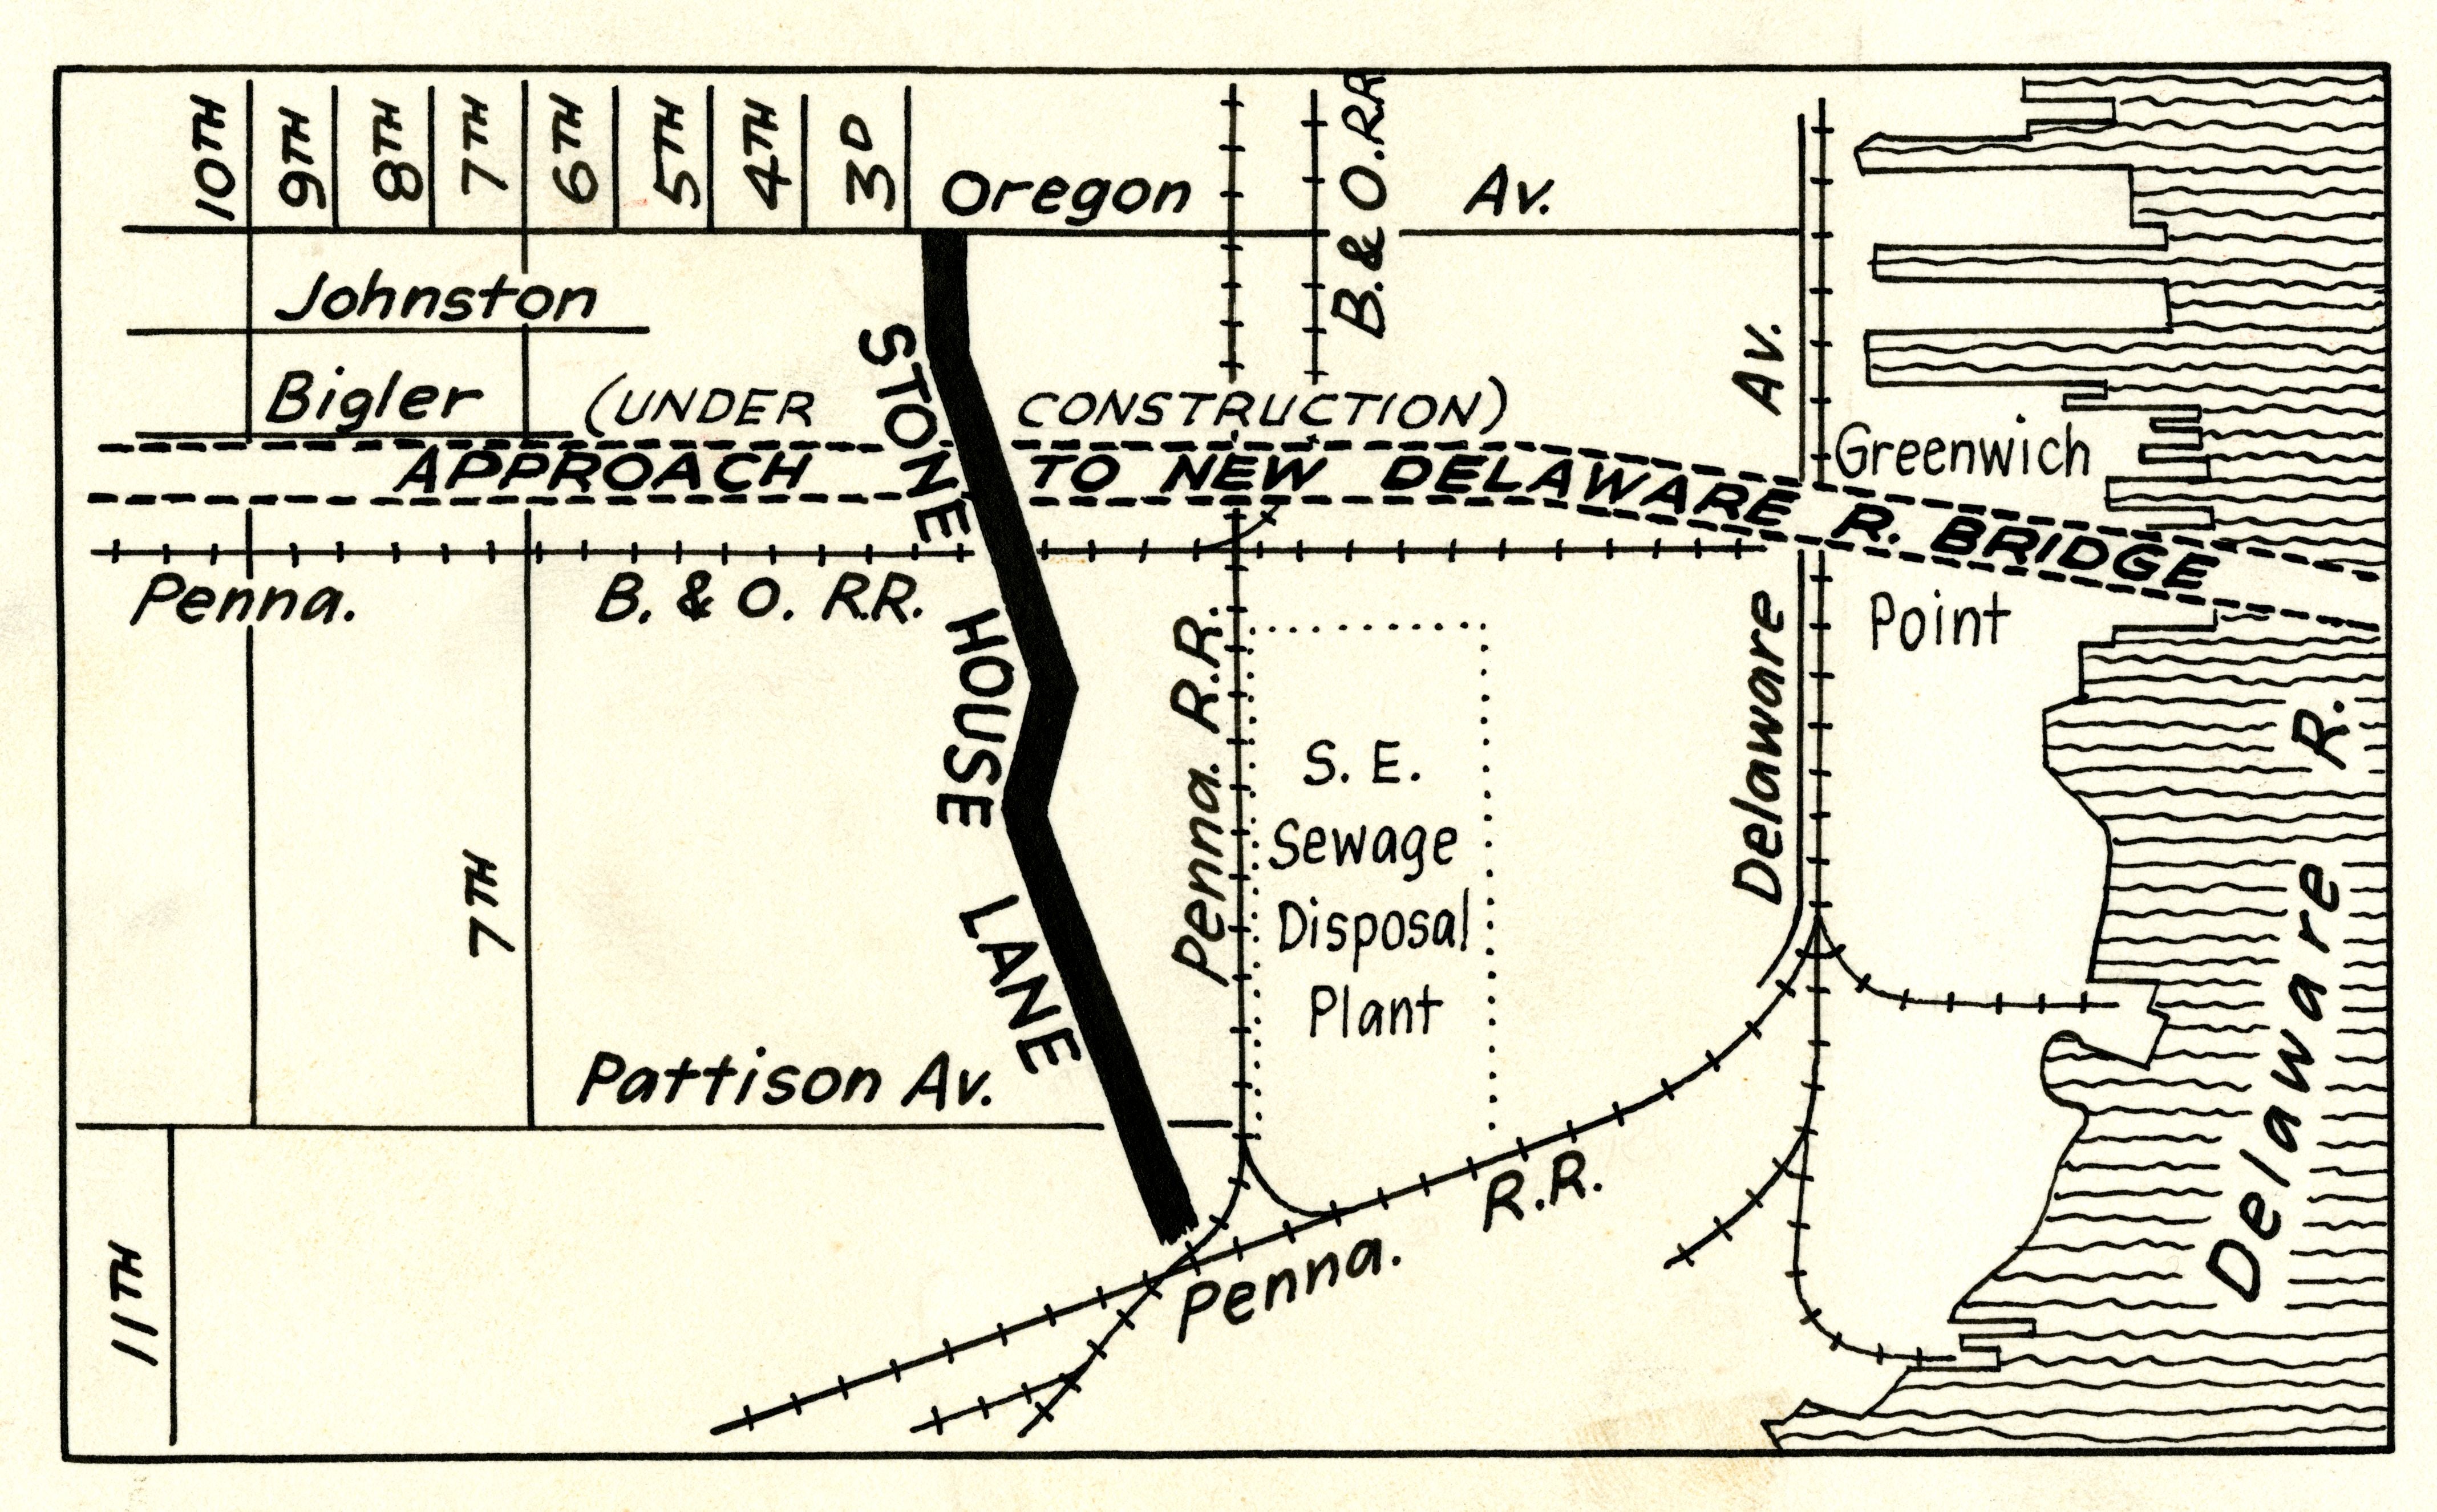 Stonehouse Lane map, October 1954, Evening Bulletin | Special Collections Research Center, Temple University Libraries, Philadelphia, PA